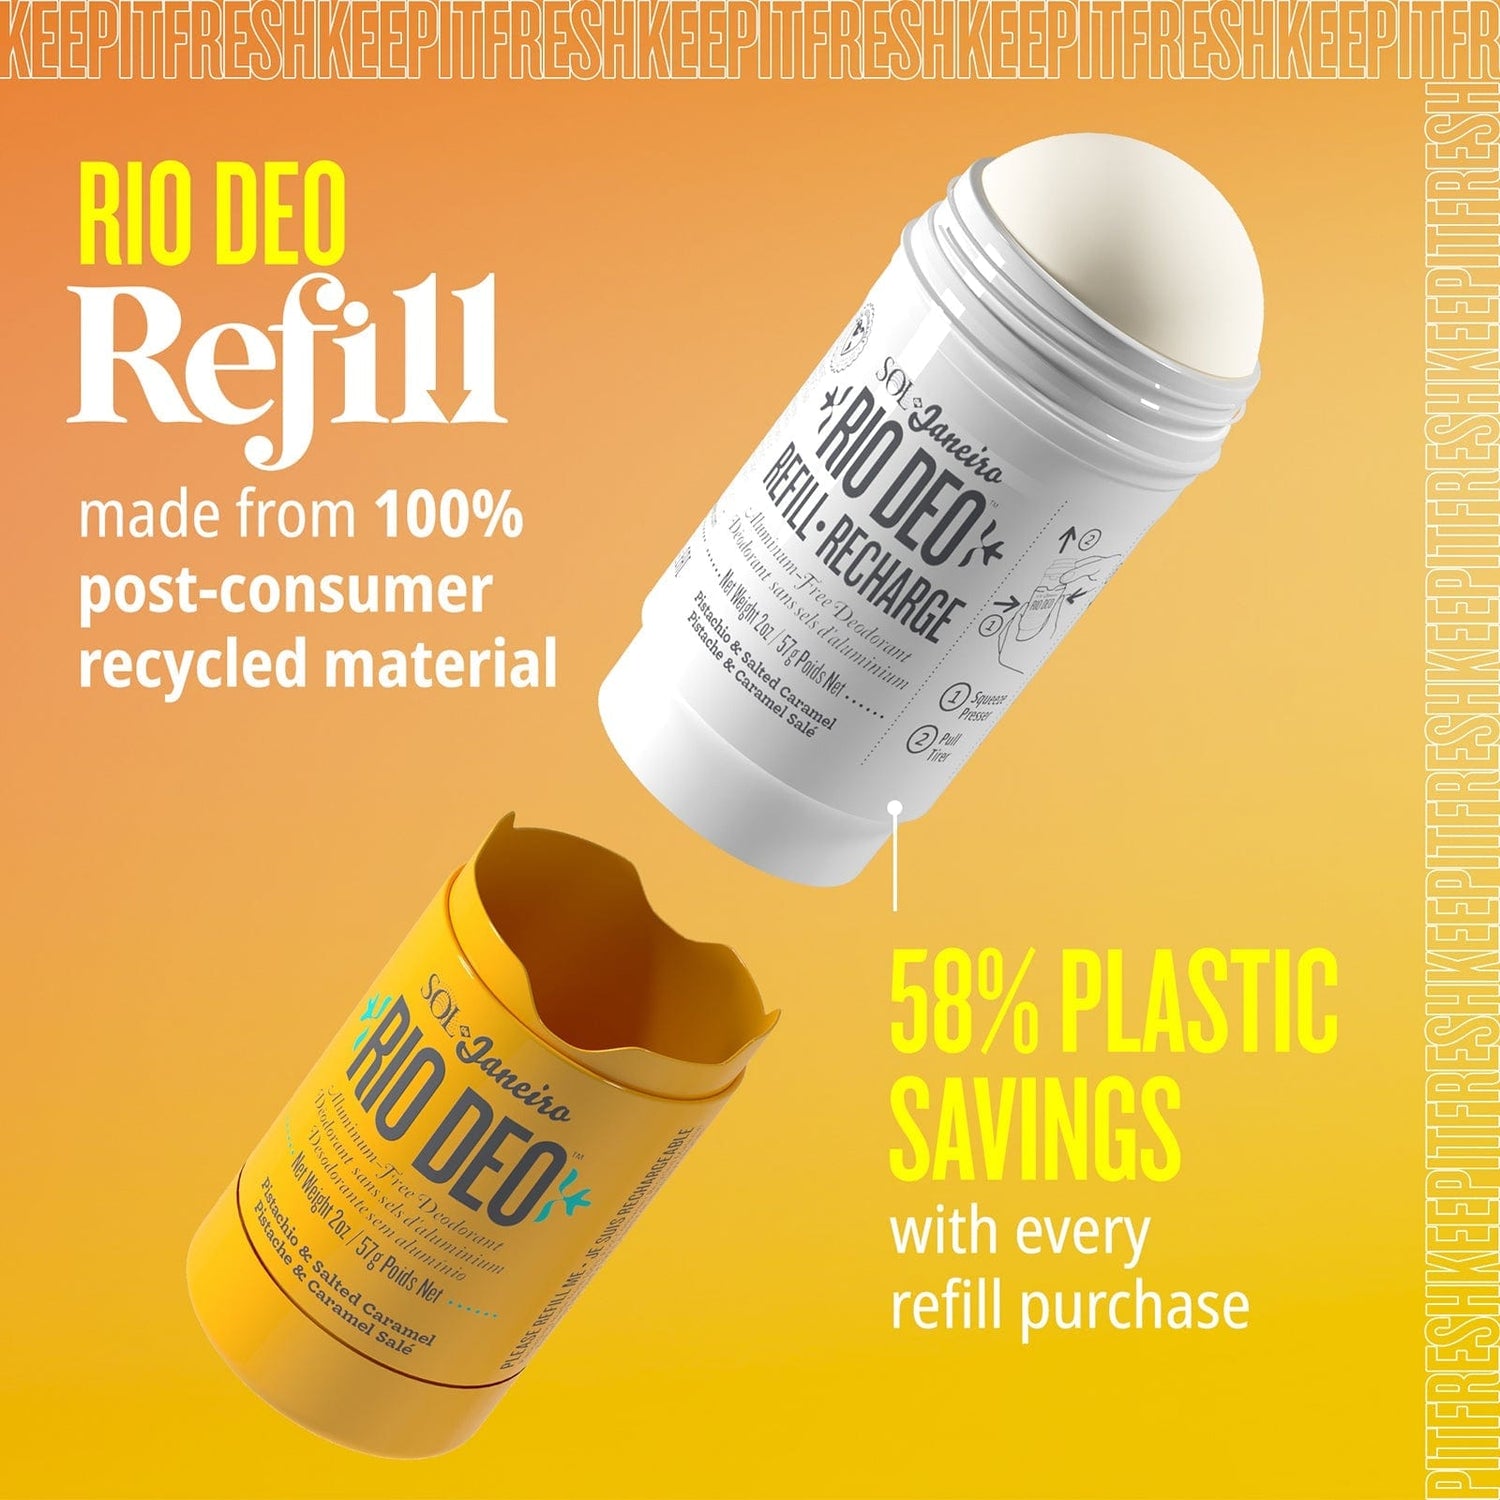 Rio Deo Refill - made from 100% post-consumer recycled material | 58% plastic savings with every refill purchase